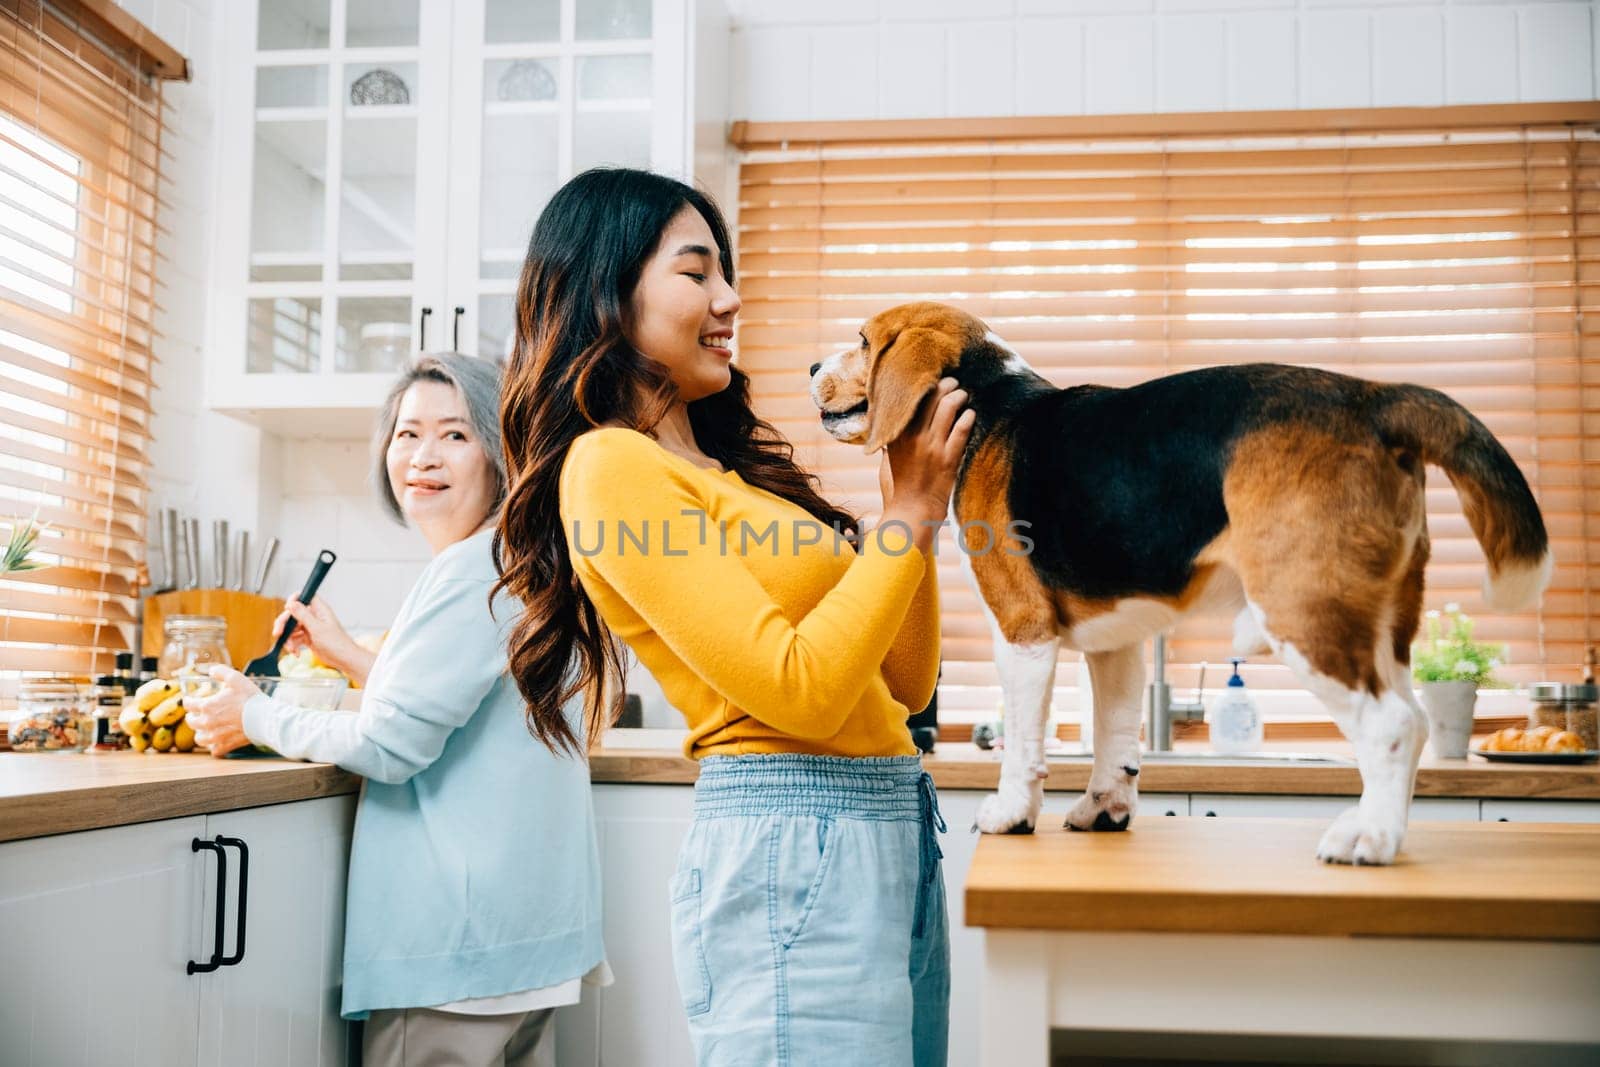 In the kitchen, a senior Asian woman, her daughter, and young woman find joy playing with their Beagle dog, emphasizing the togetherness, togetherness, and enjoyment of pet ownership. by Sorapop